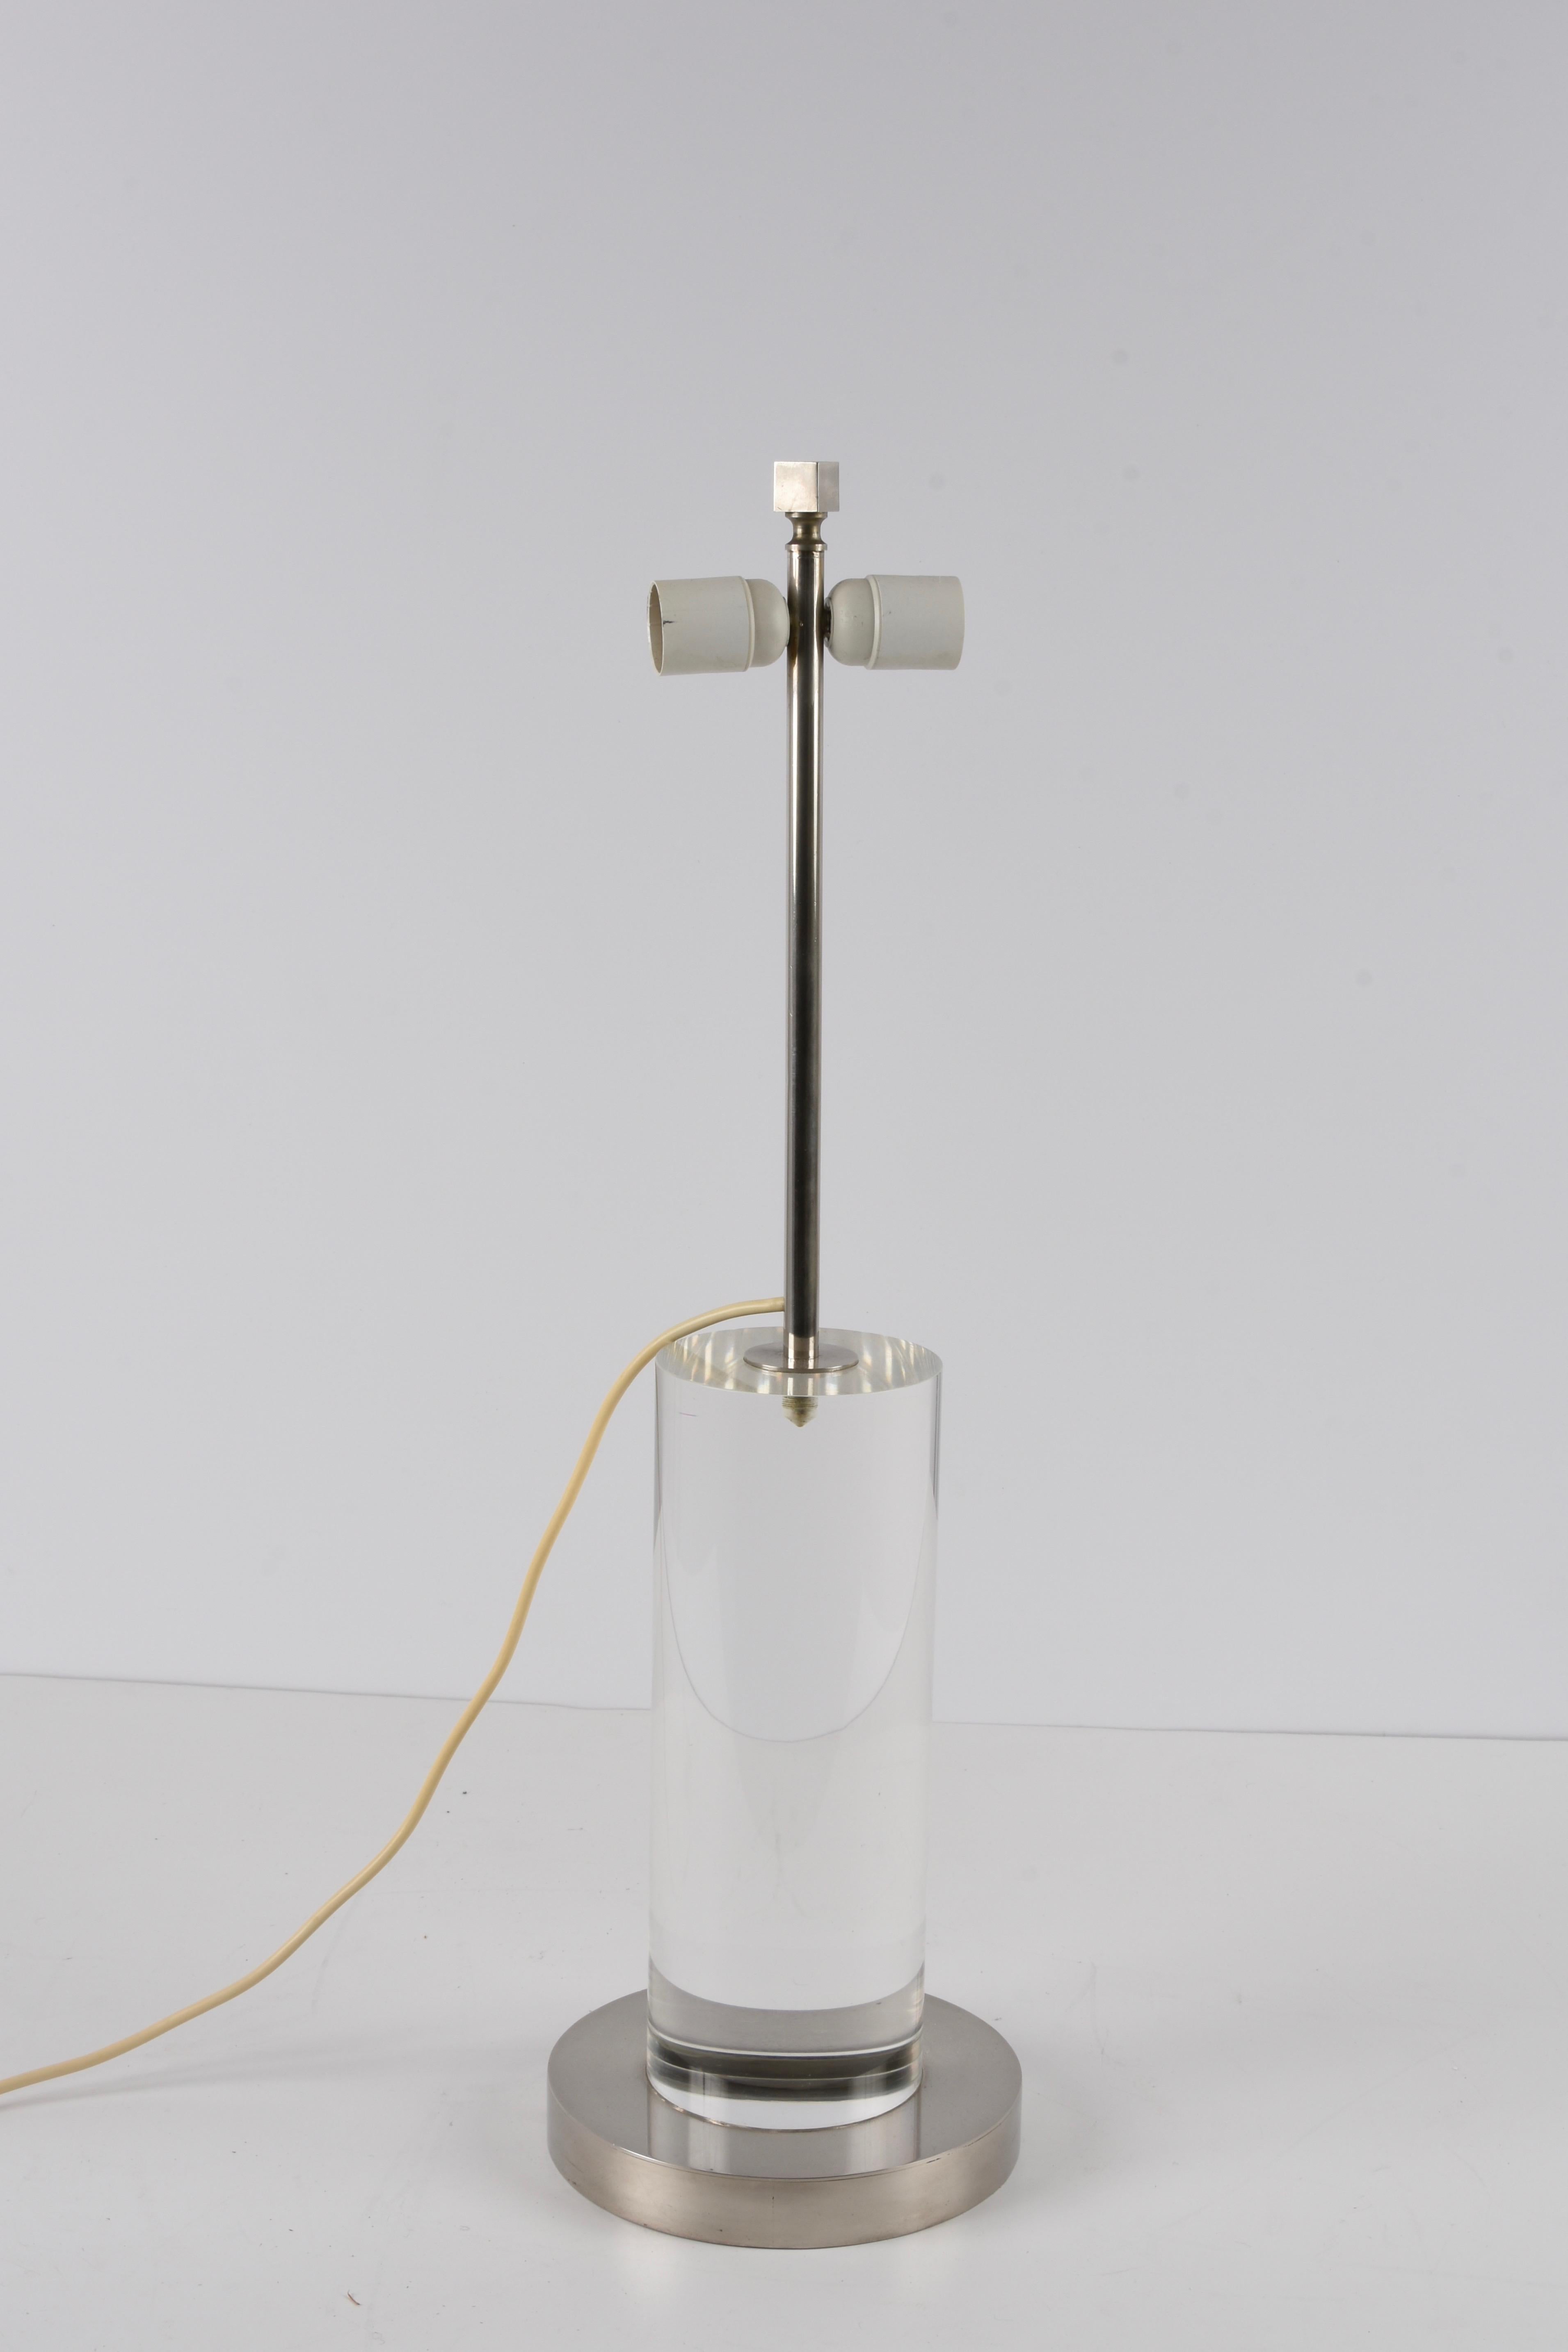 Romeo Rega Midcentury Italian Table Lamp with Lucite Column and Brass Base 1970s For Sale 14